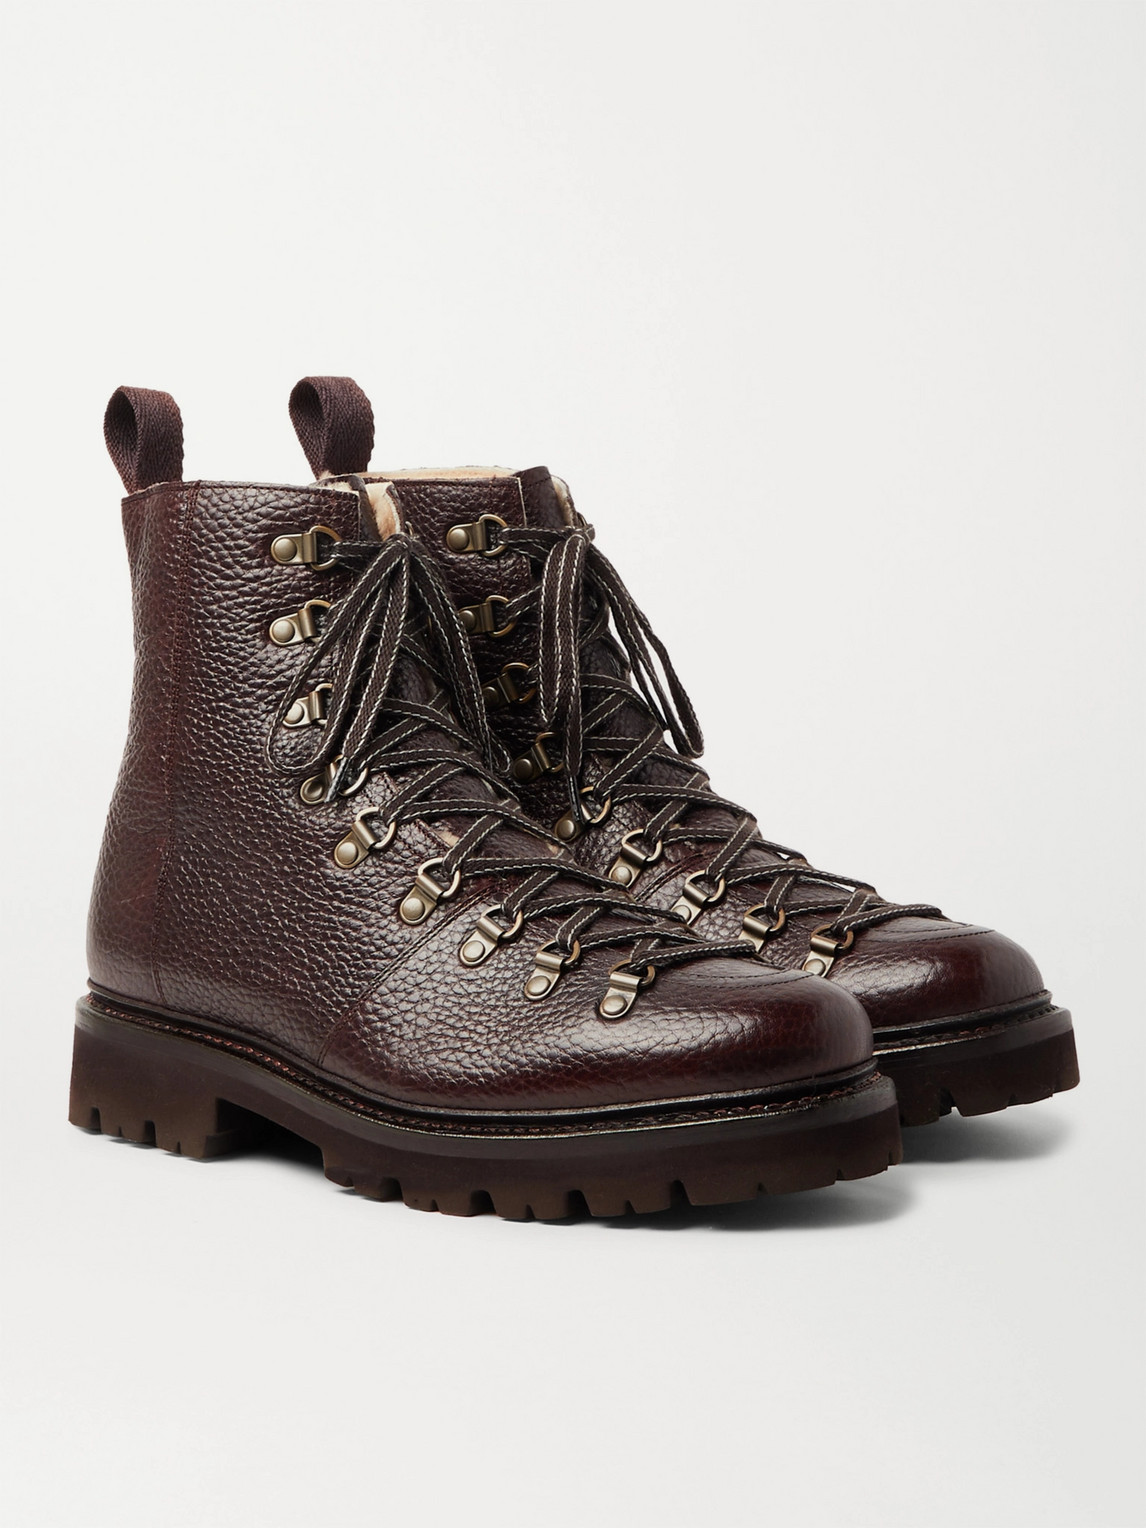 GRENSON BRADY SHEARLING-LINED FULL-GRAIN LEATHER HIKING BOOTS